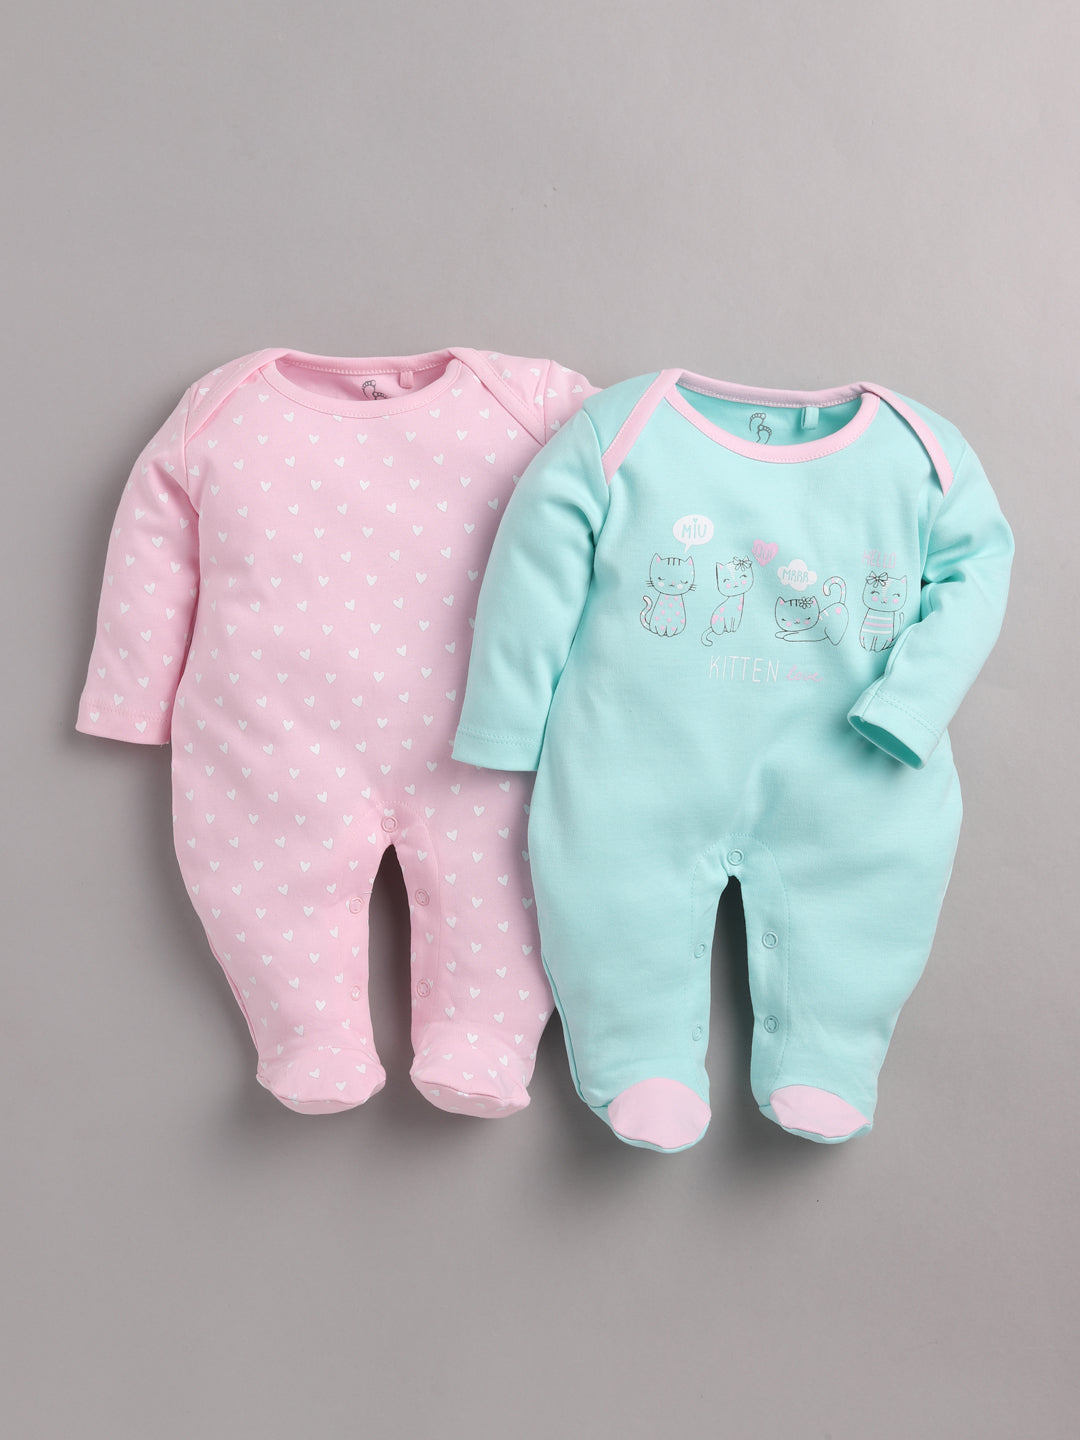 BabyGo 100% Cotton Rompers/Sleepsuits/Jumpsuit/Night Suits for Baby Girls, New-Born, infants, Pack of 2 Combo